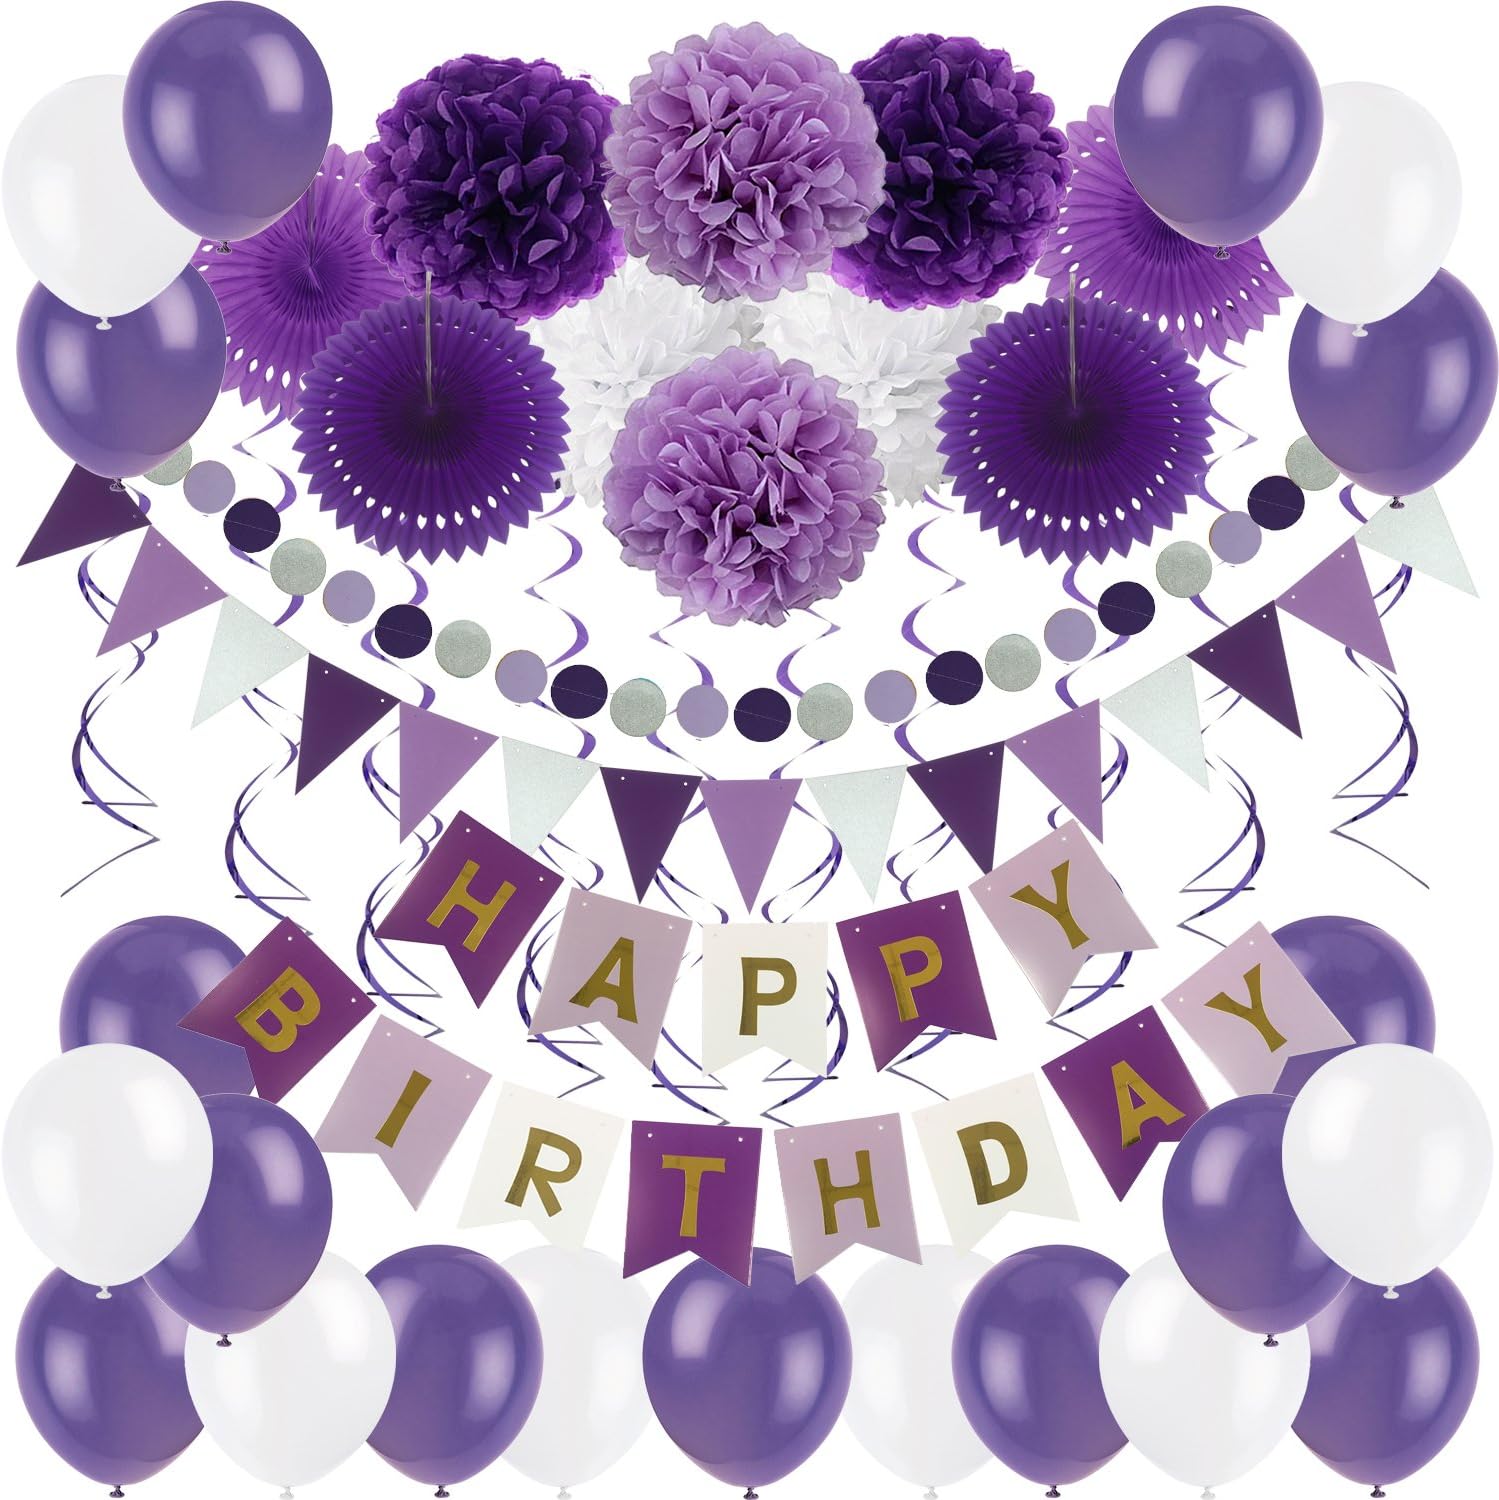 ZERODECO Birthday Decoration Set, Happy Birthday Banner Bunting with 4 Paper Fans Tissue 6 Paper Pom Poms Flower 10 Hanging Swirl and 20 Balloon for Birthday Party Decorations - Purple Lavender White